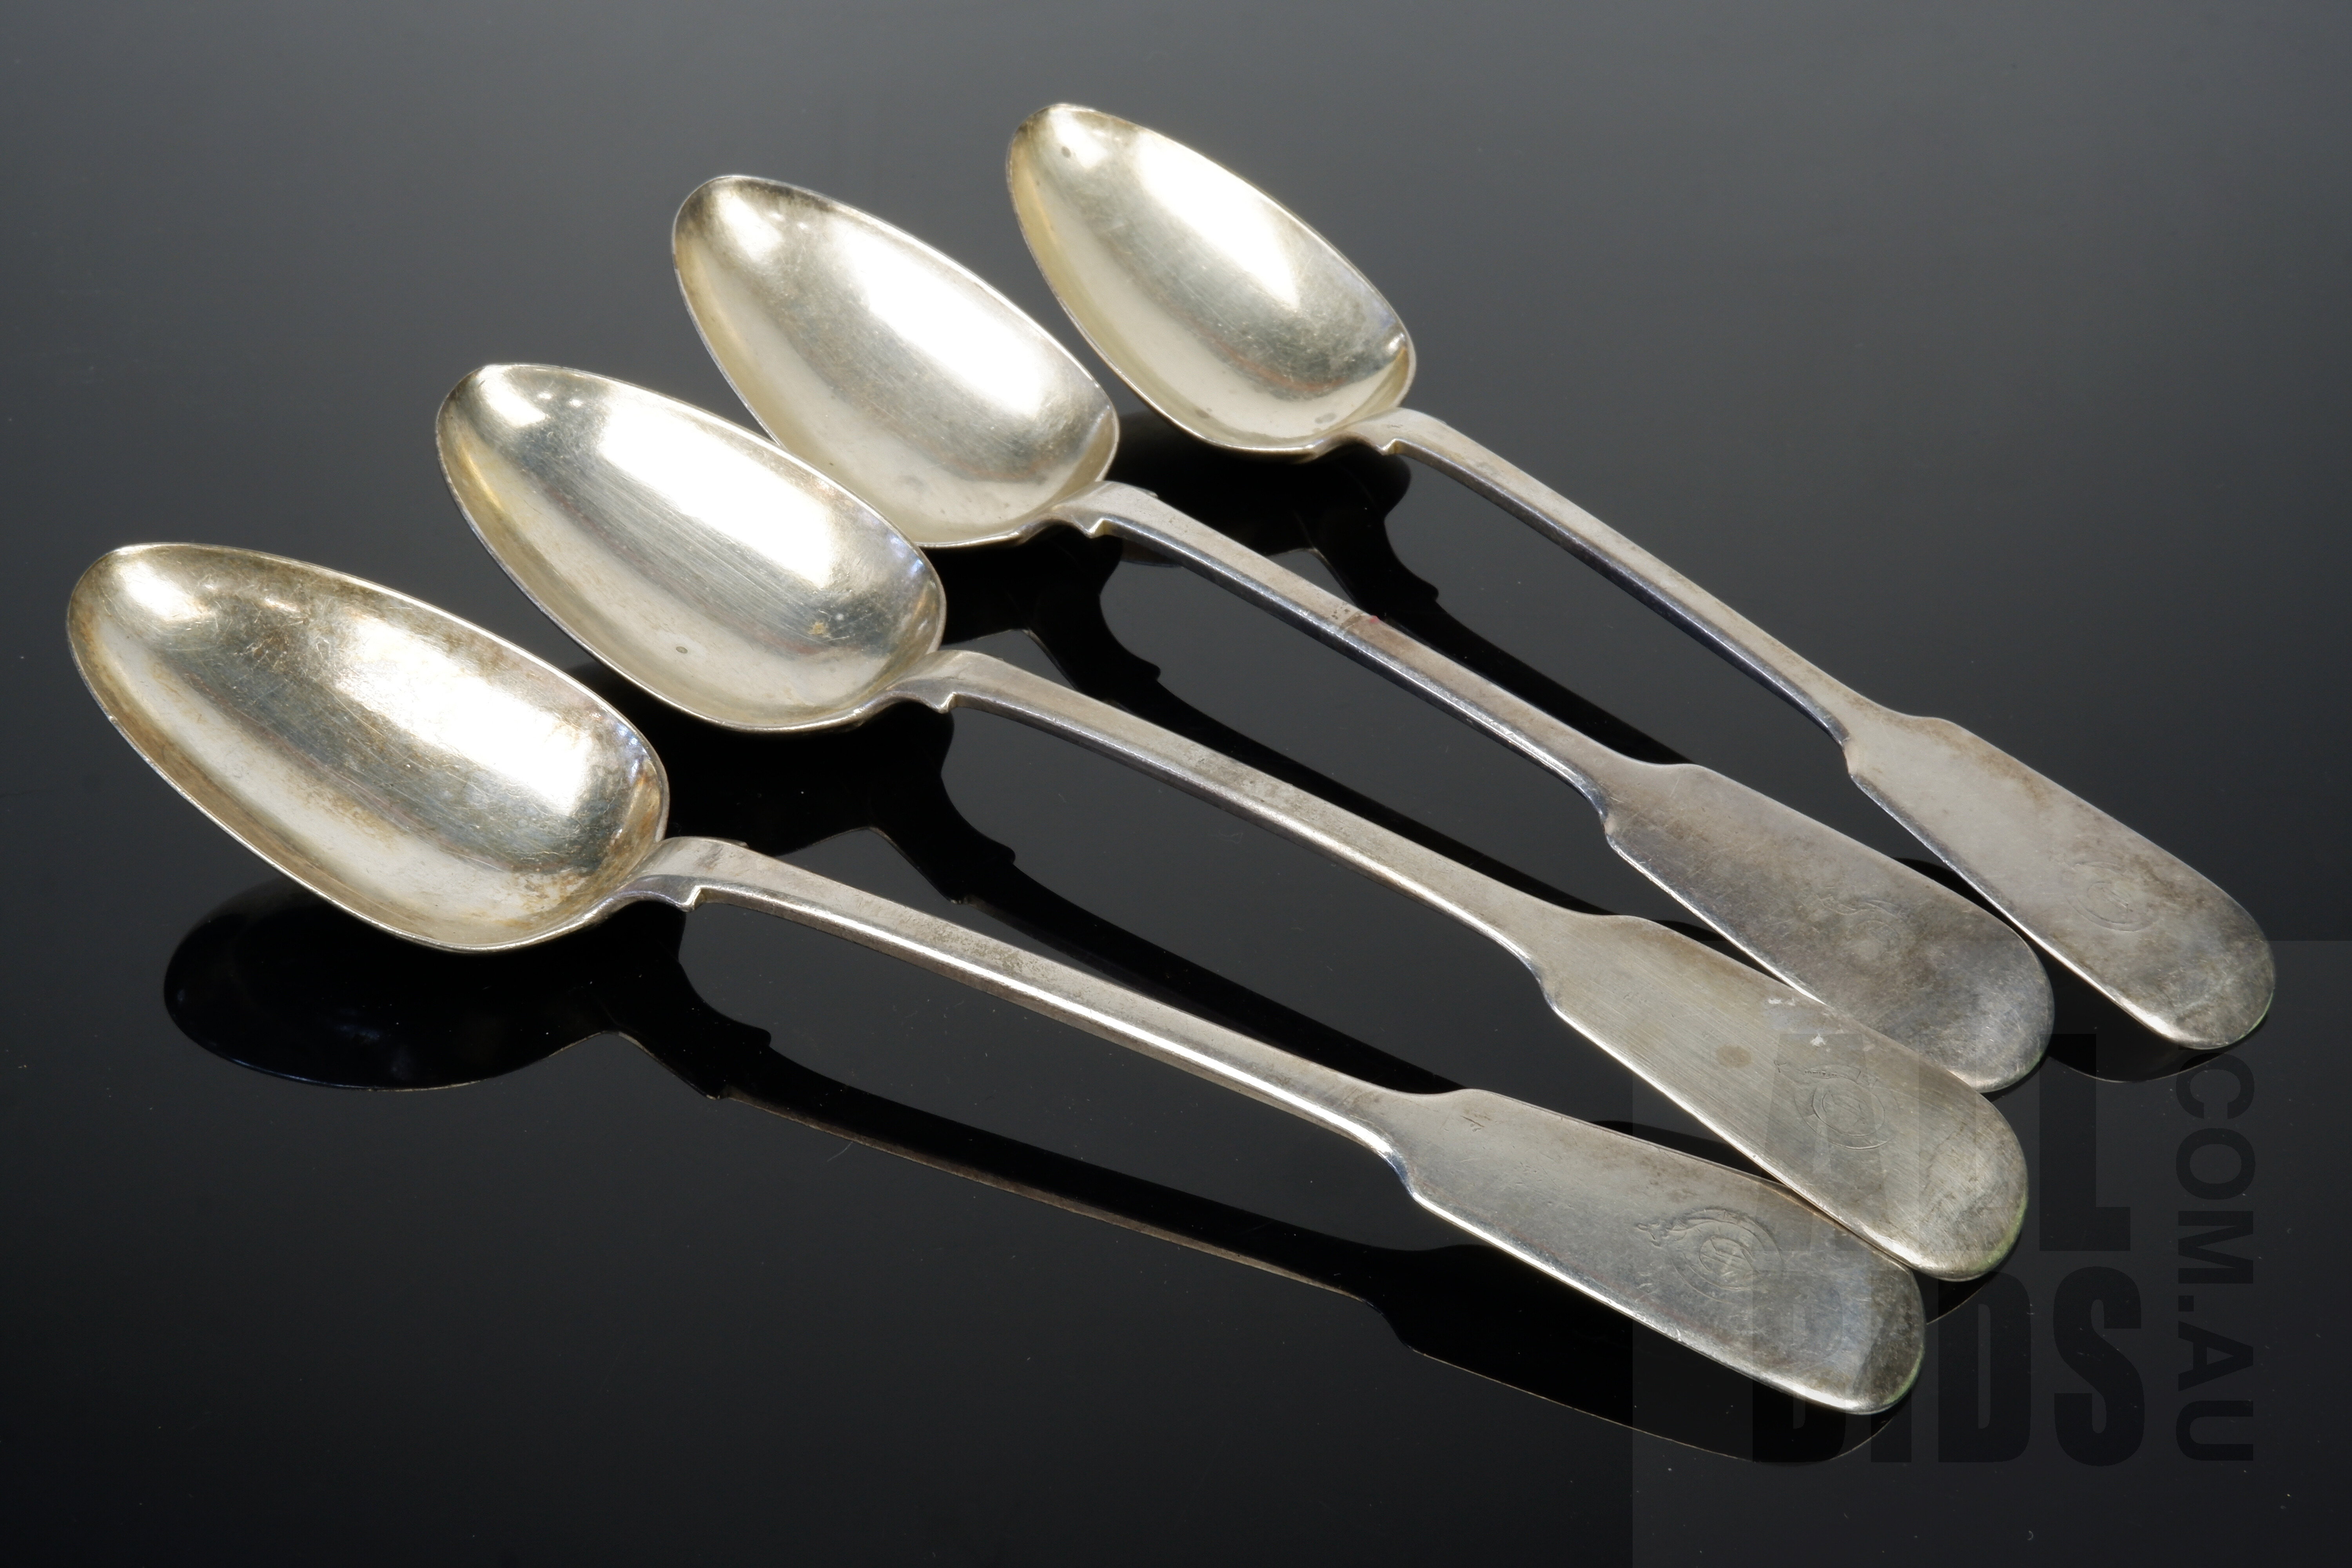 'Matched Set of Four Victorian Sterling Silver Serving Spoons, Exeter, John Stone, 1852, 300g'